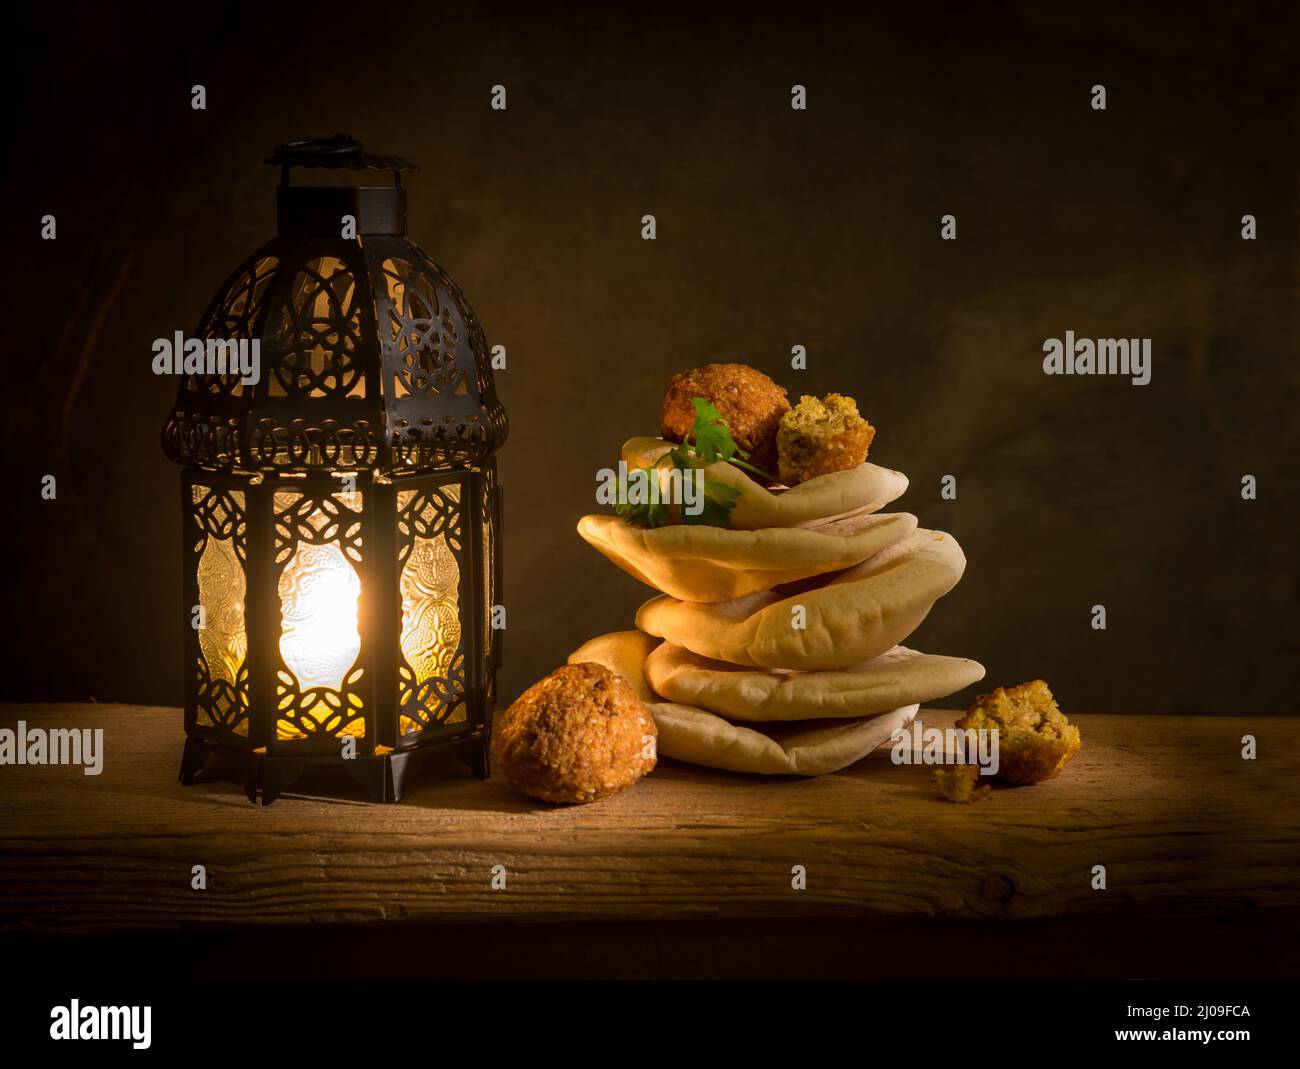 Falafel and kuboos with Ramadan lantern. Traditional Arabic lantern with Middle Eastern cuisine or food. Stock Photo